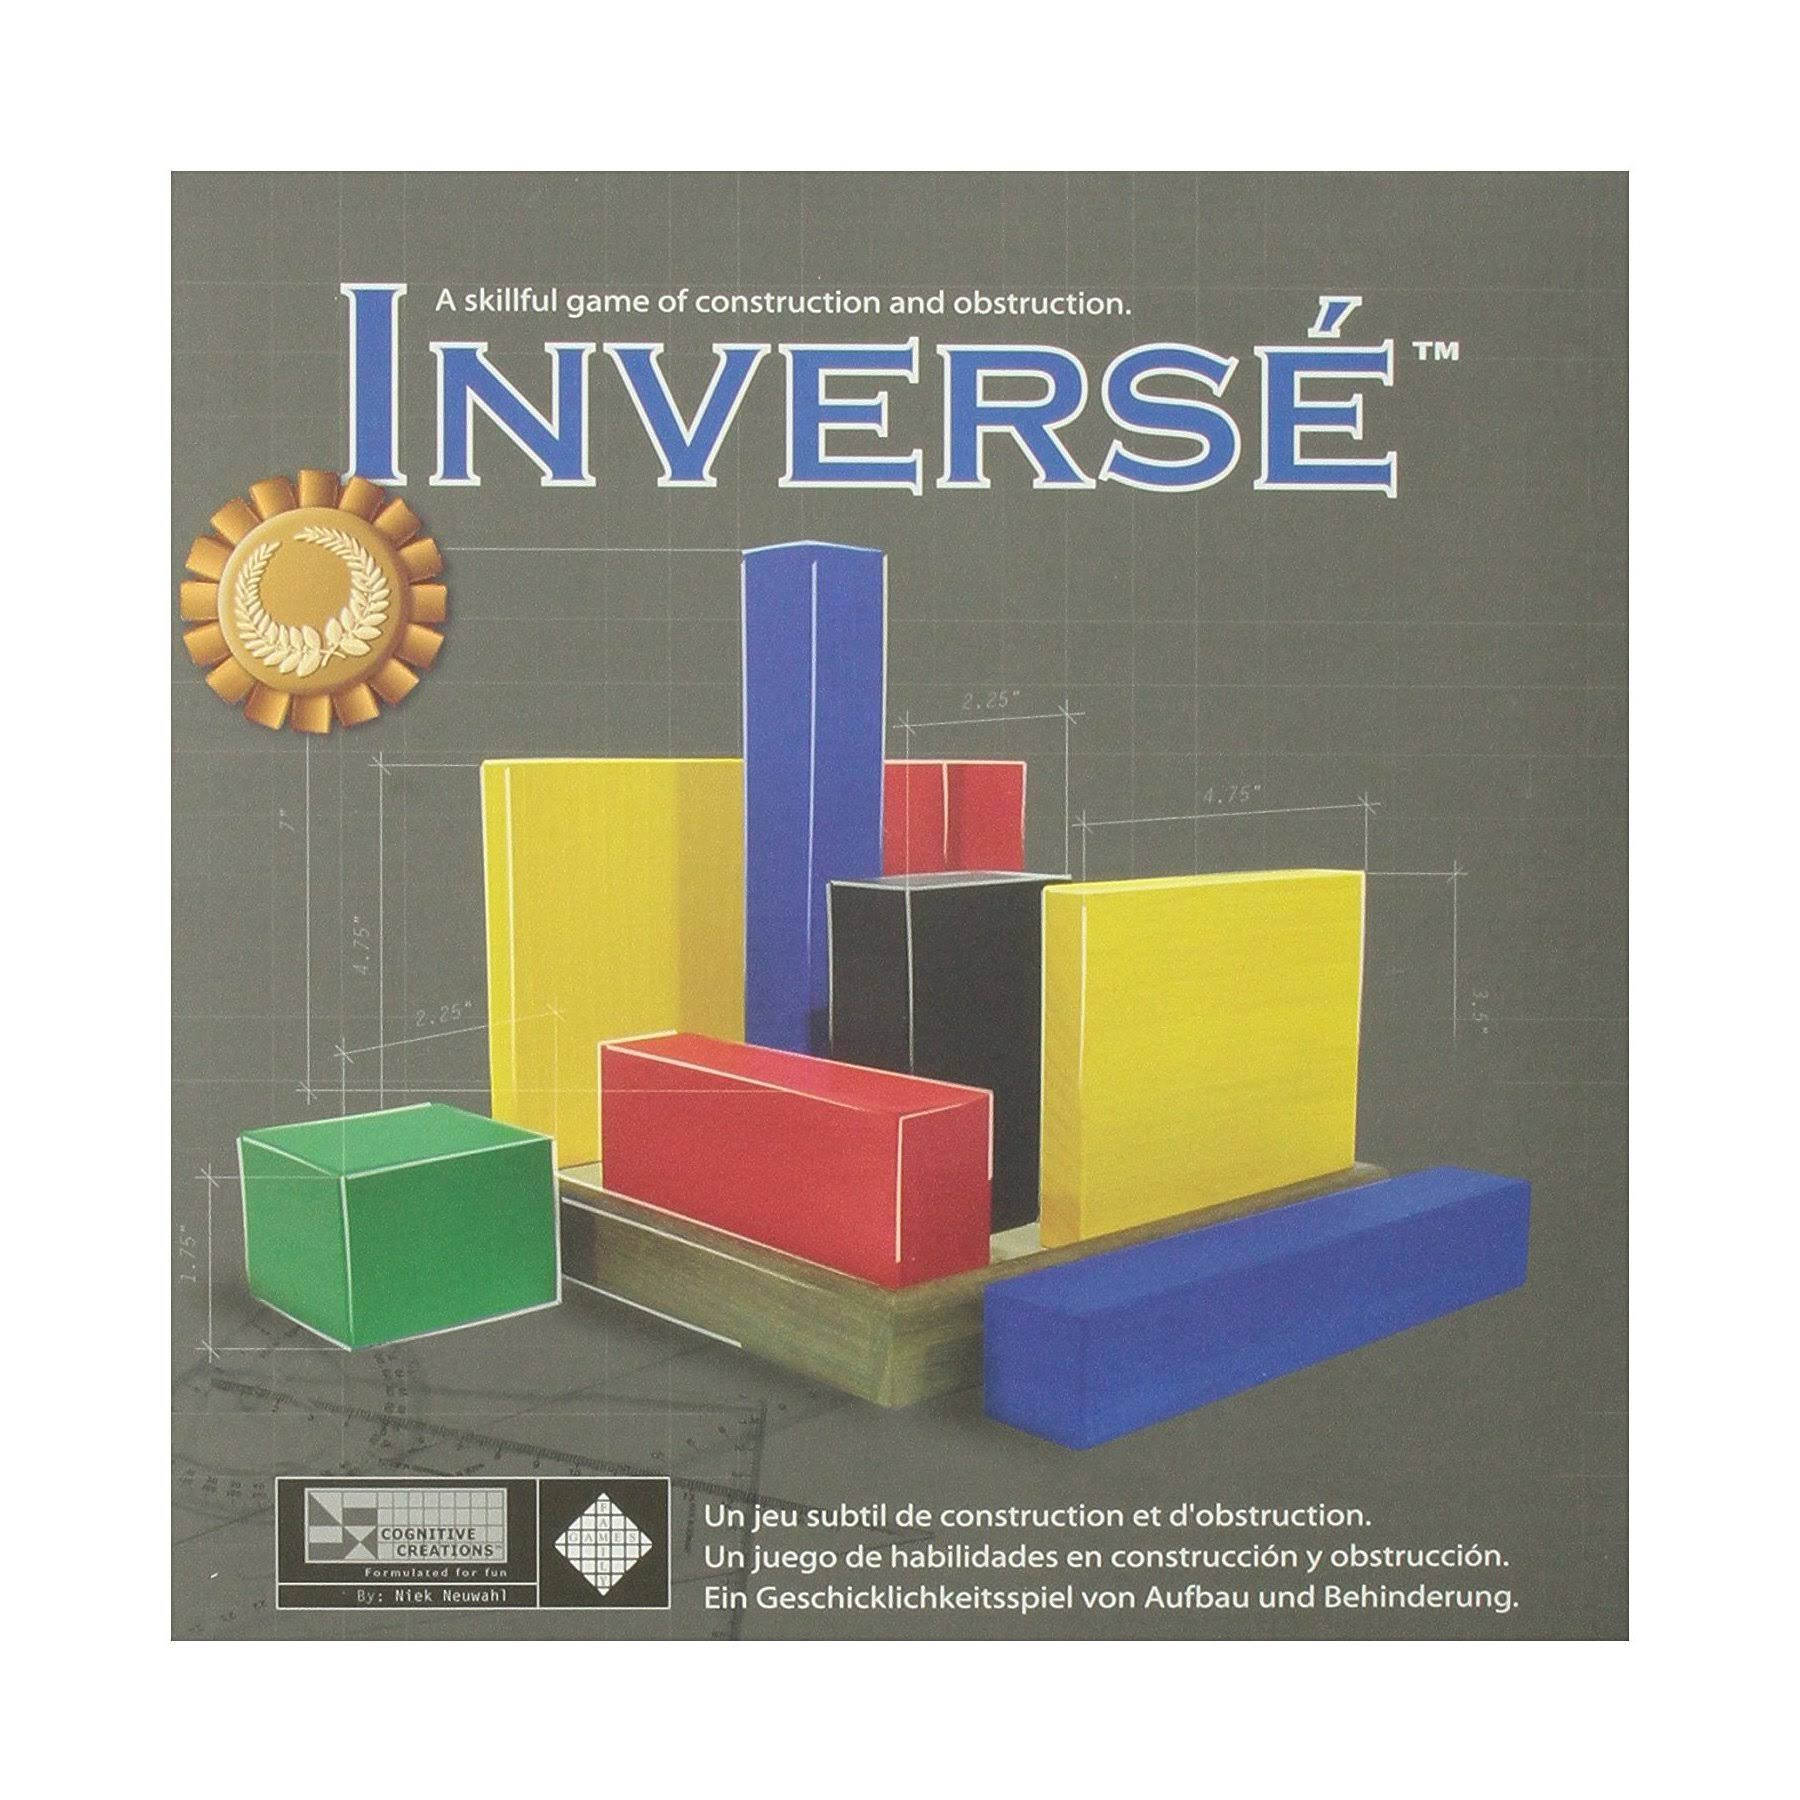 Family Games Inverse Wood Strategy Tabletop Board Game - 2 Players